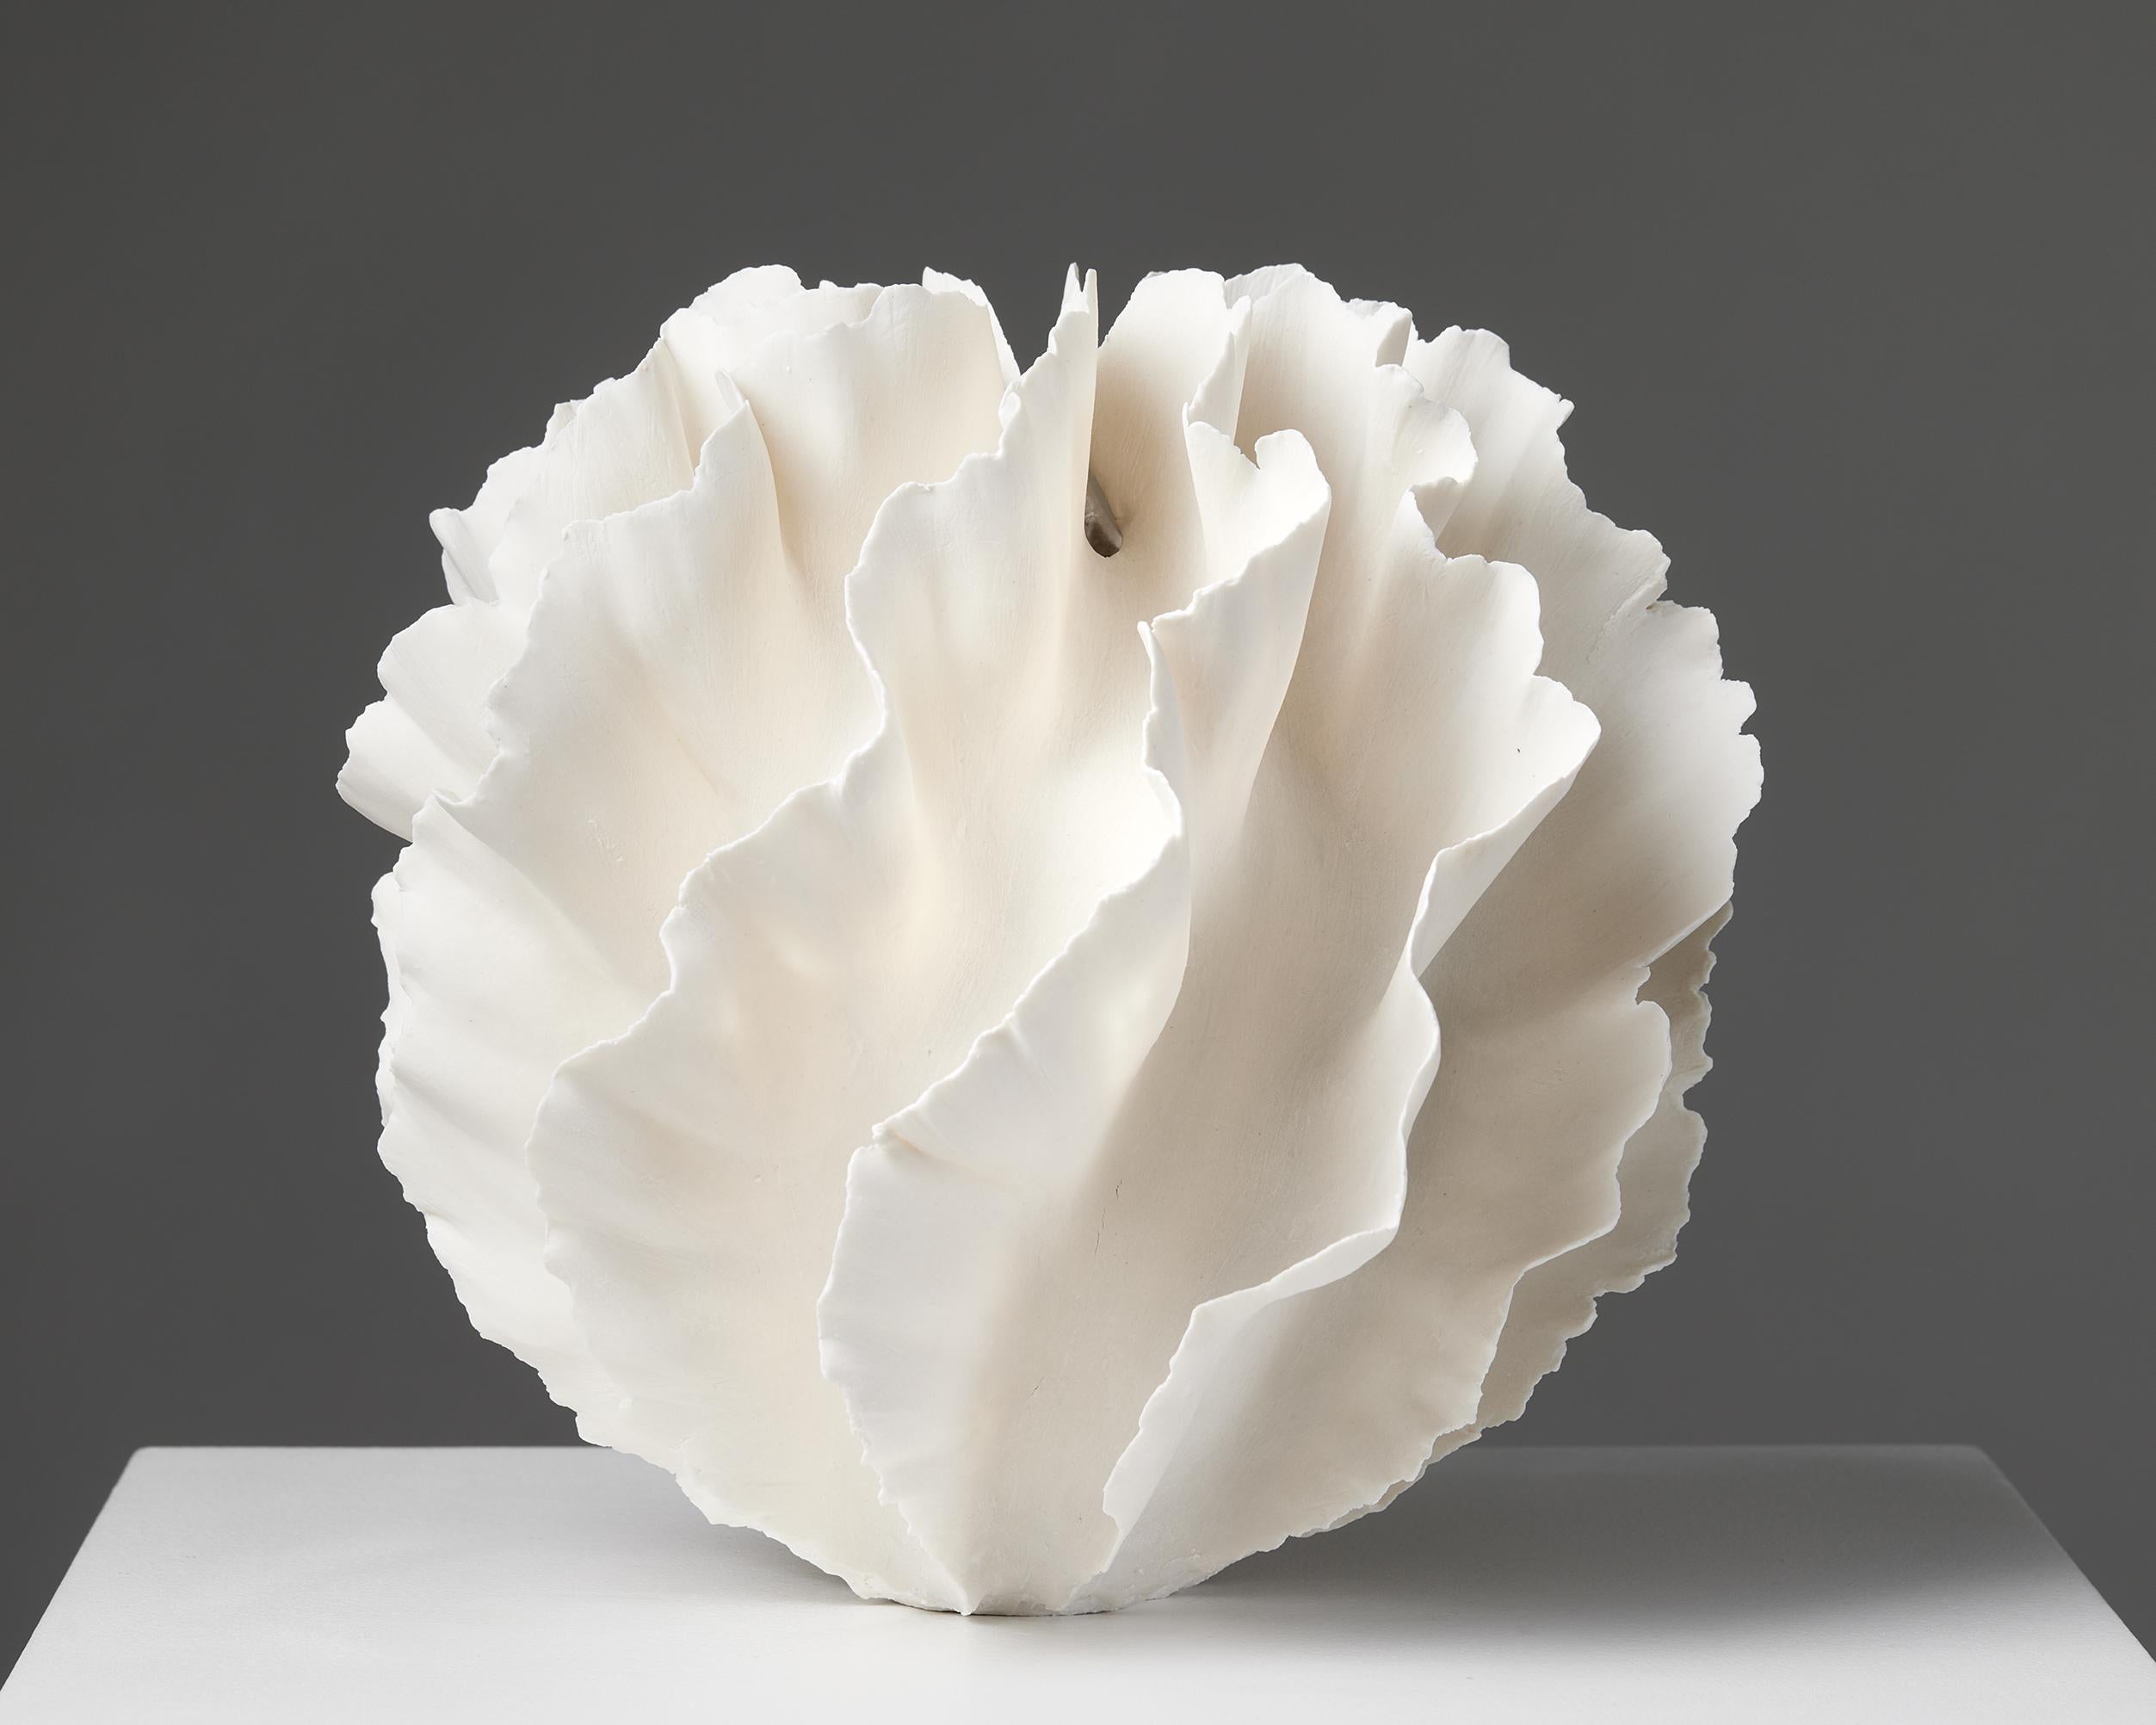 Vessel by Sandra Davolio,
Denmark, 2022.

Porcelain.

Unique.

Signed.

Sandra Davolio is an acclaimed contemporary Danish-Italian ceramic artist who has been represented by Modernity for more than ten years. Davolio takes her inspiration